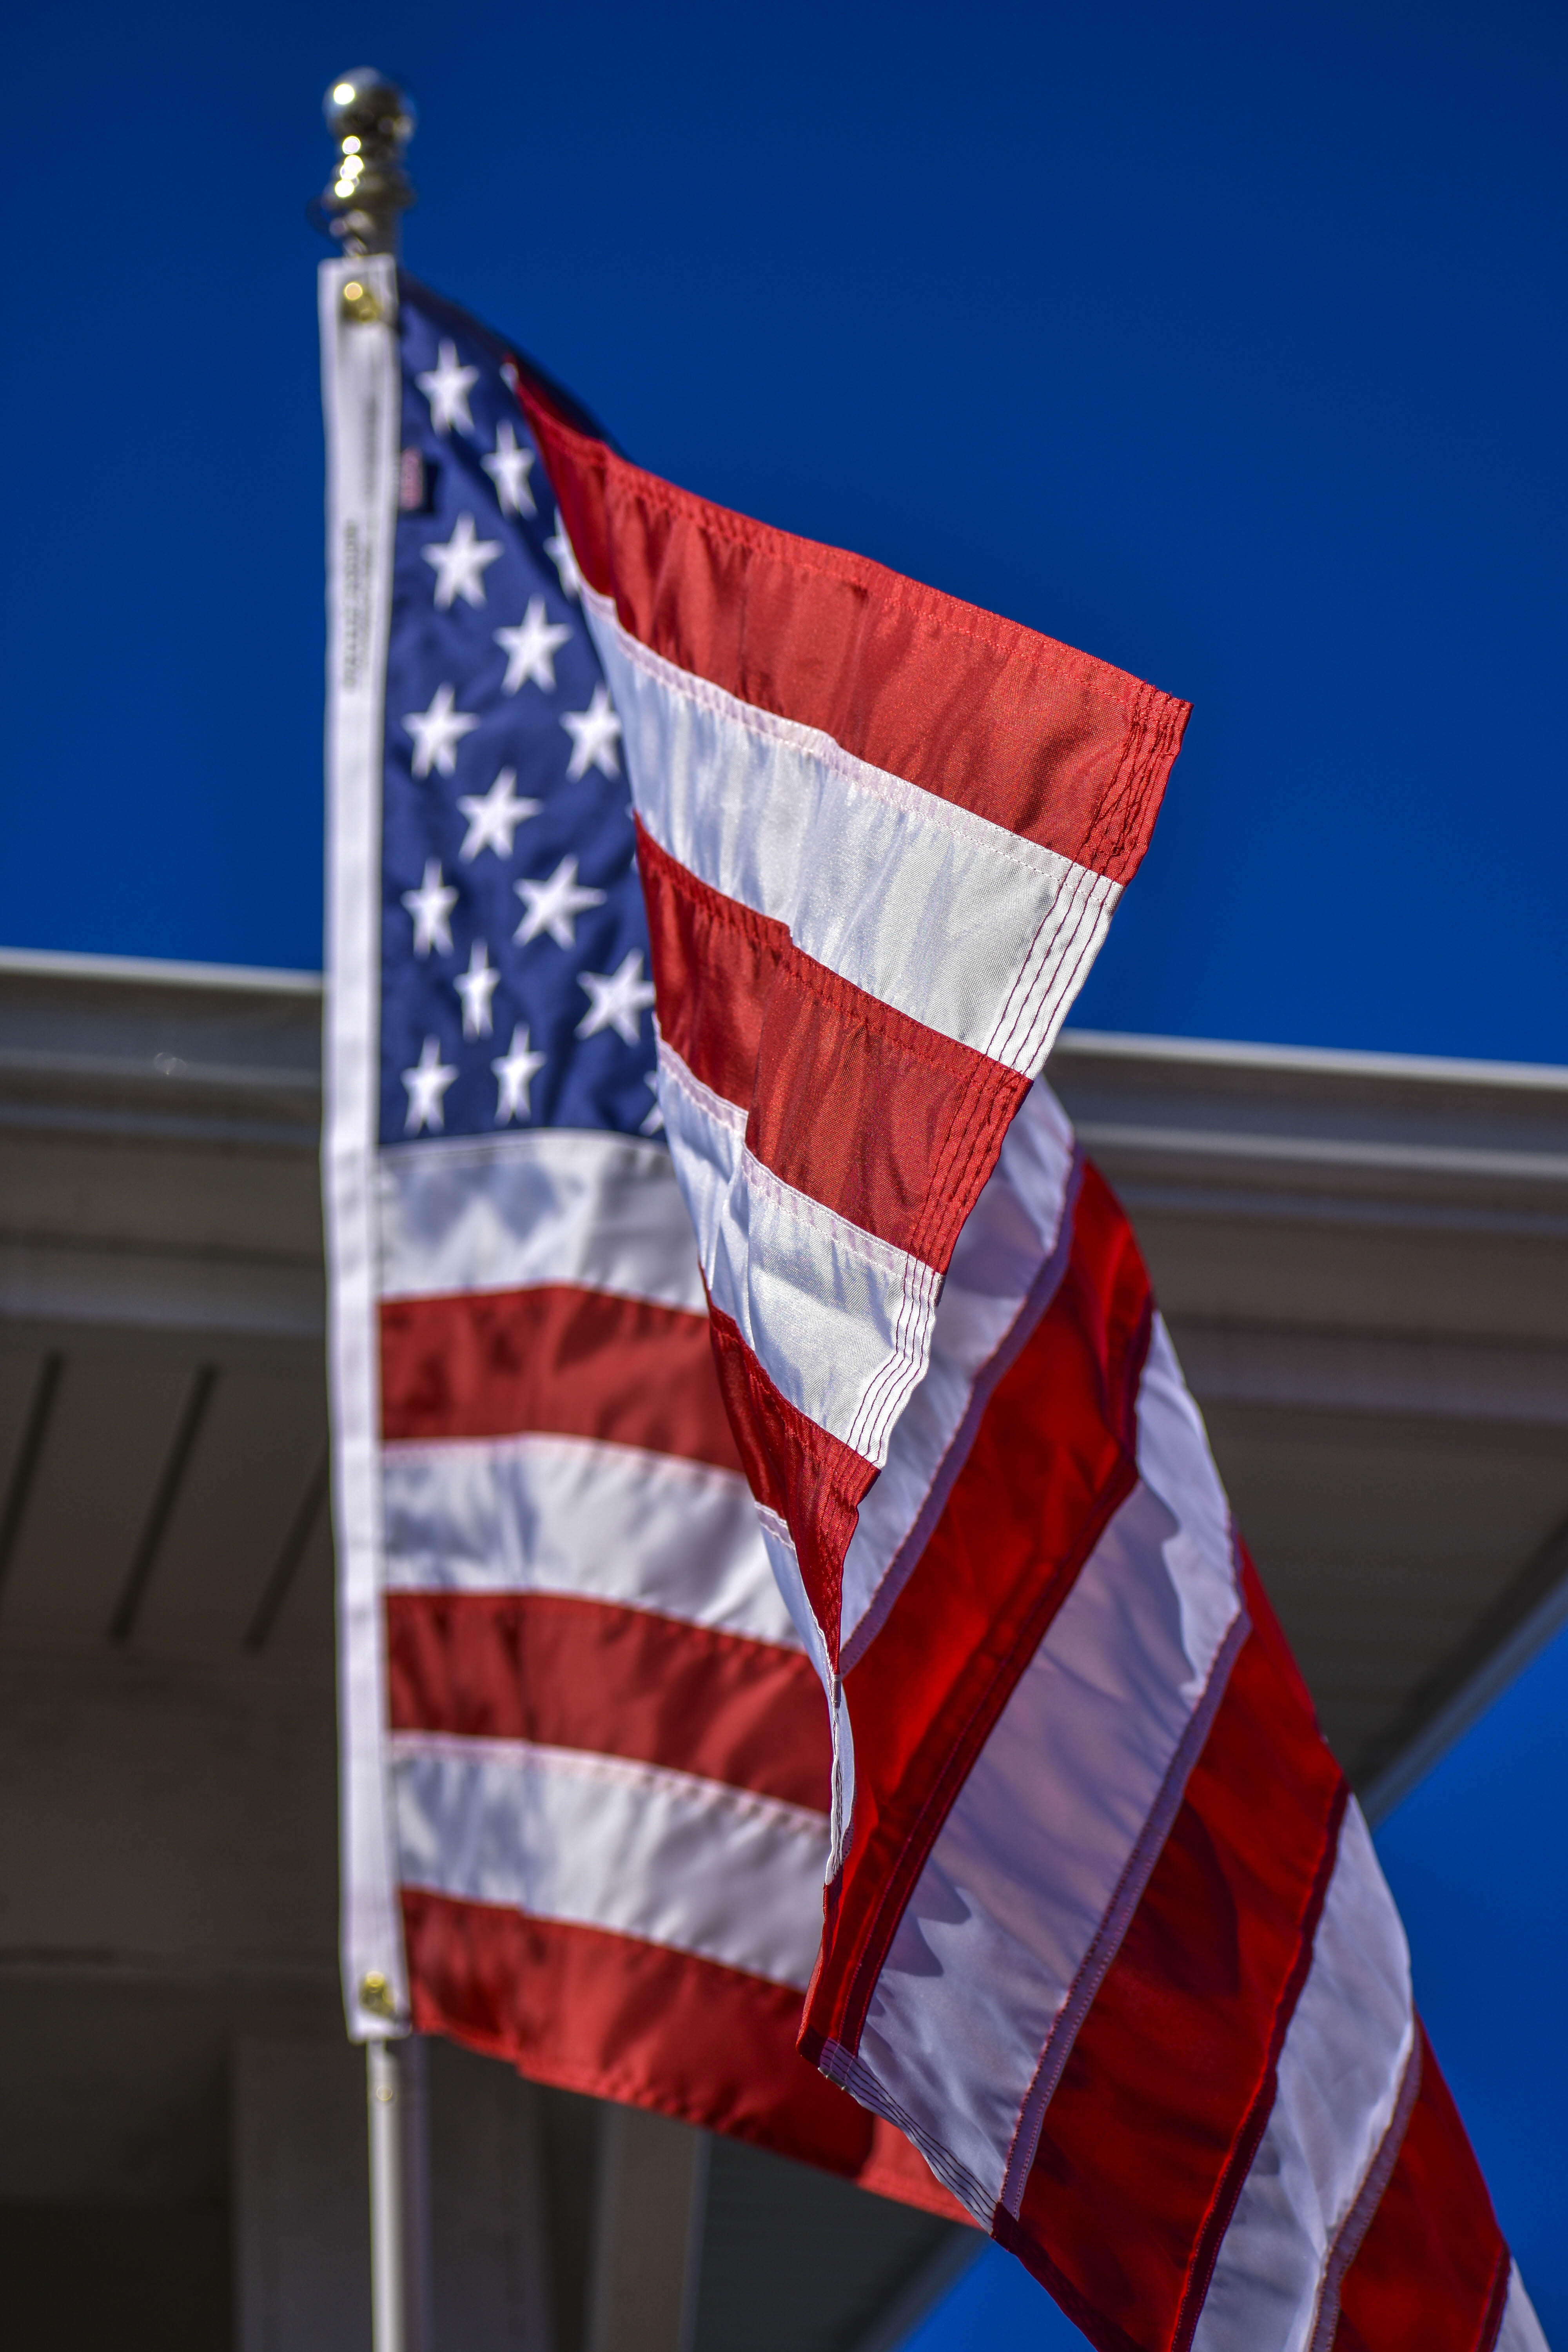 Outdoor American Flags | Durable Nylon & Polyester USA Flags